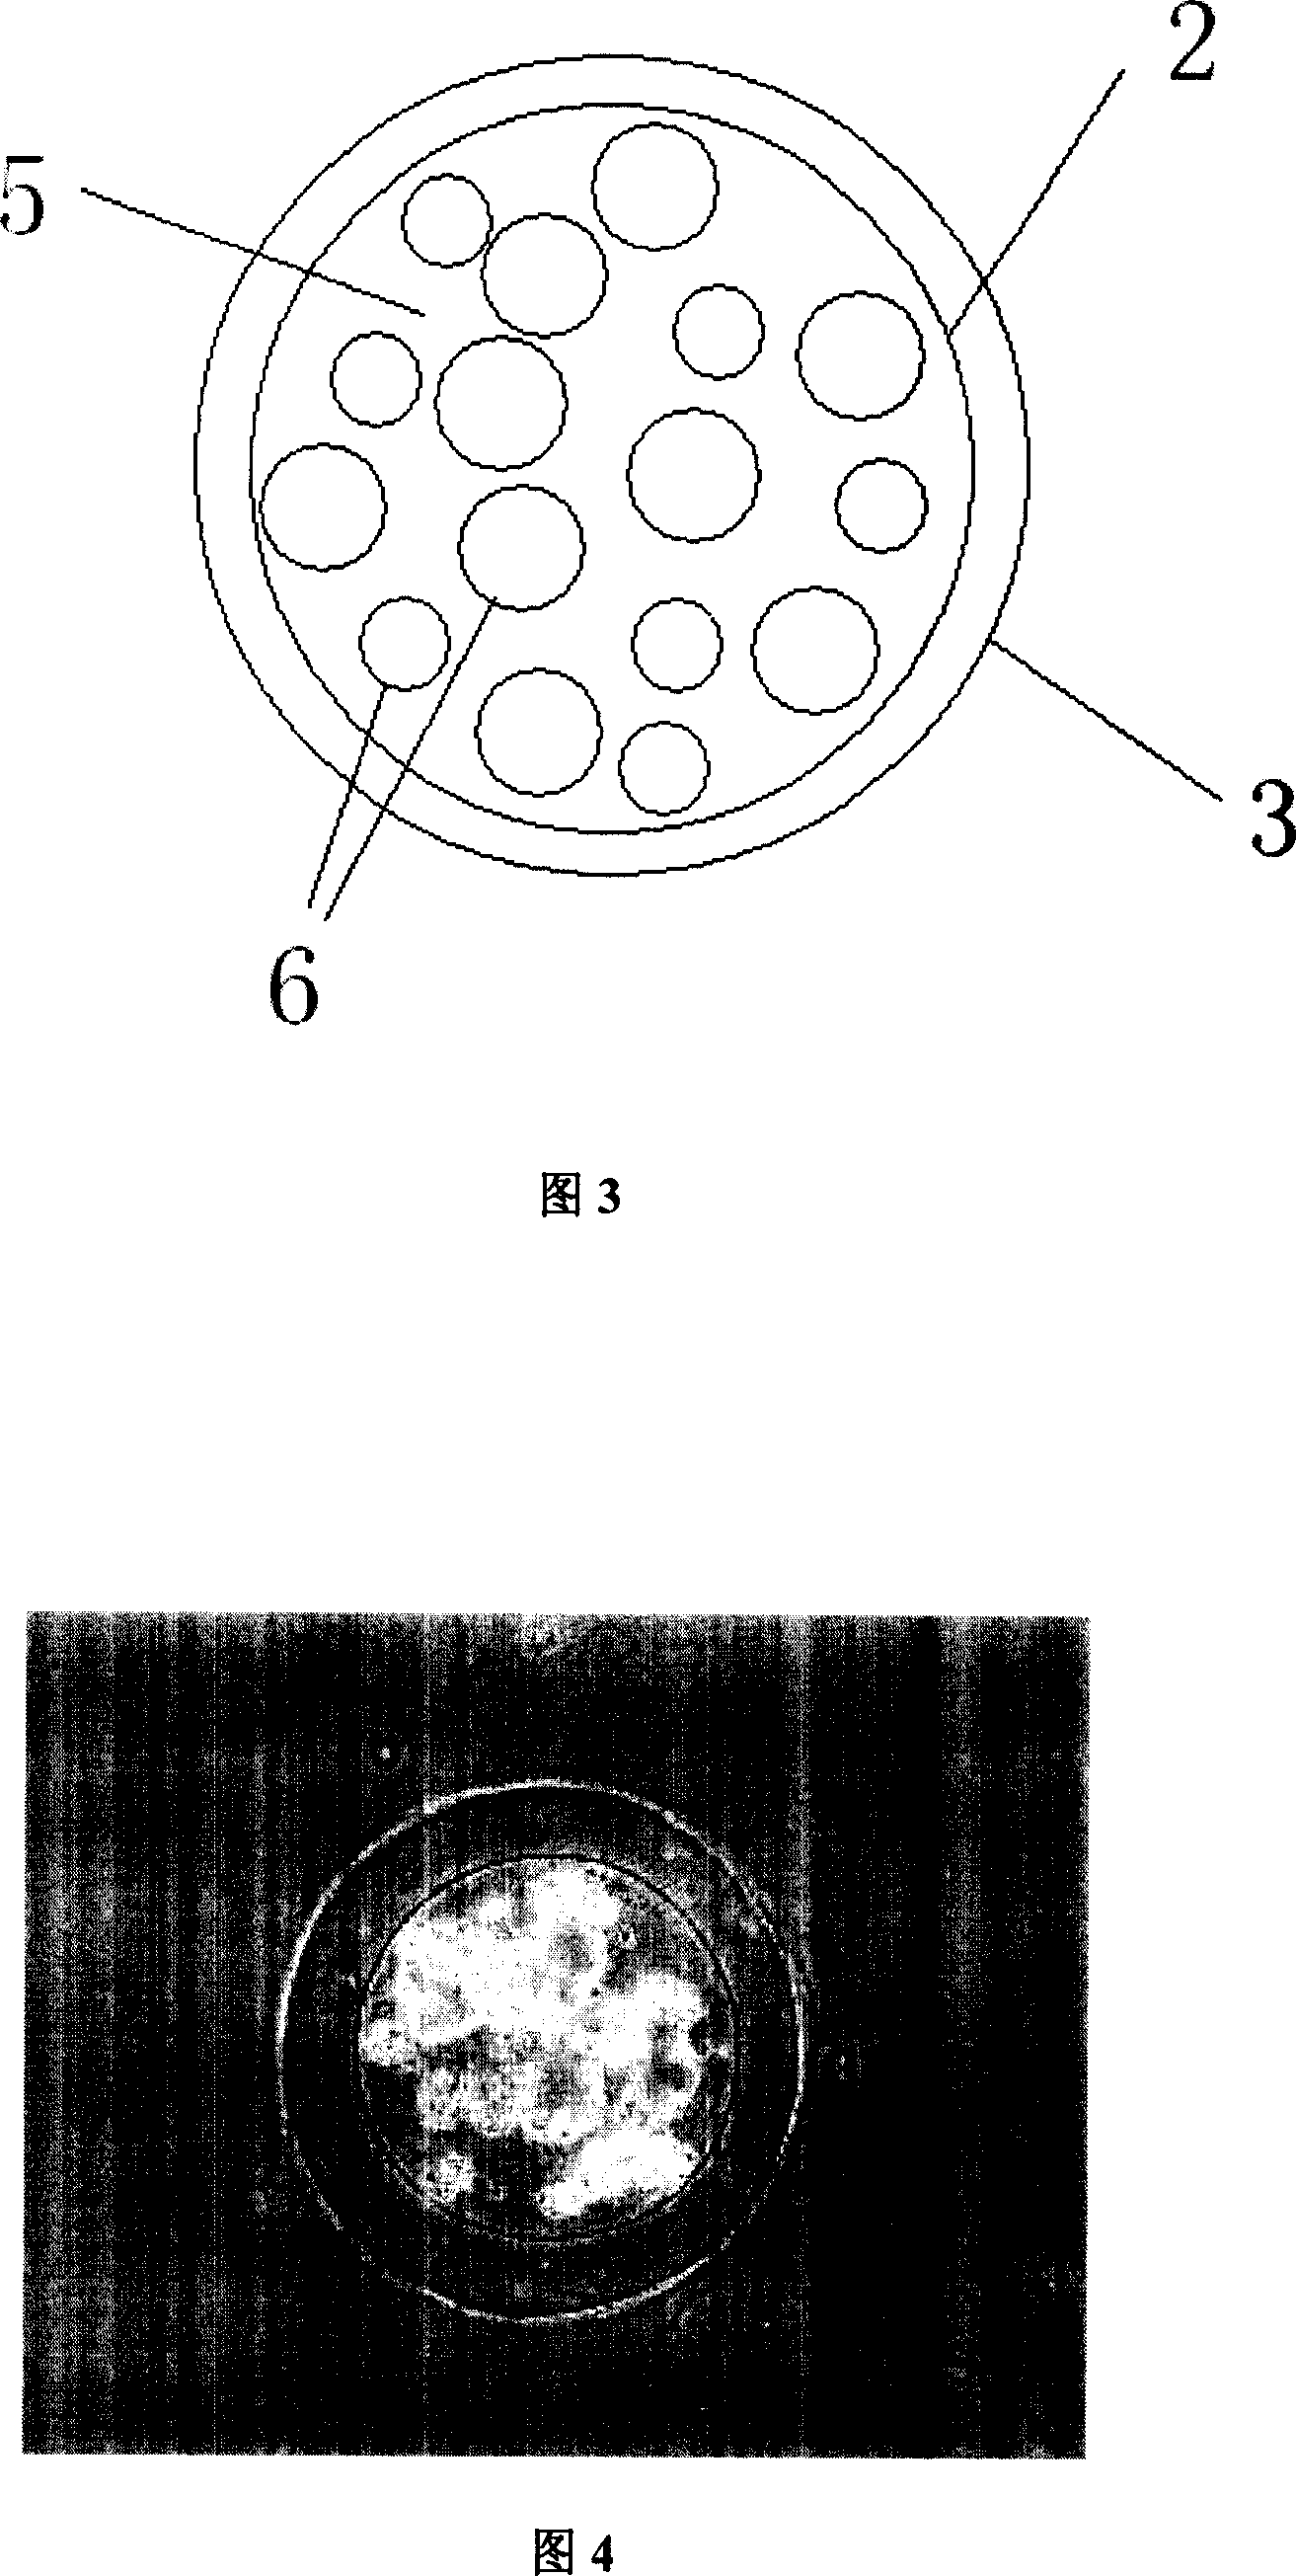 Method for producing liquid core microcapsule by electrostatic spraying